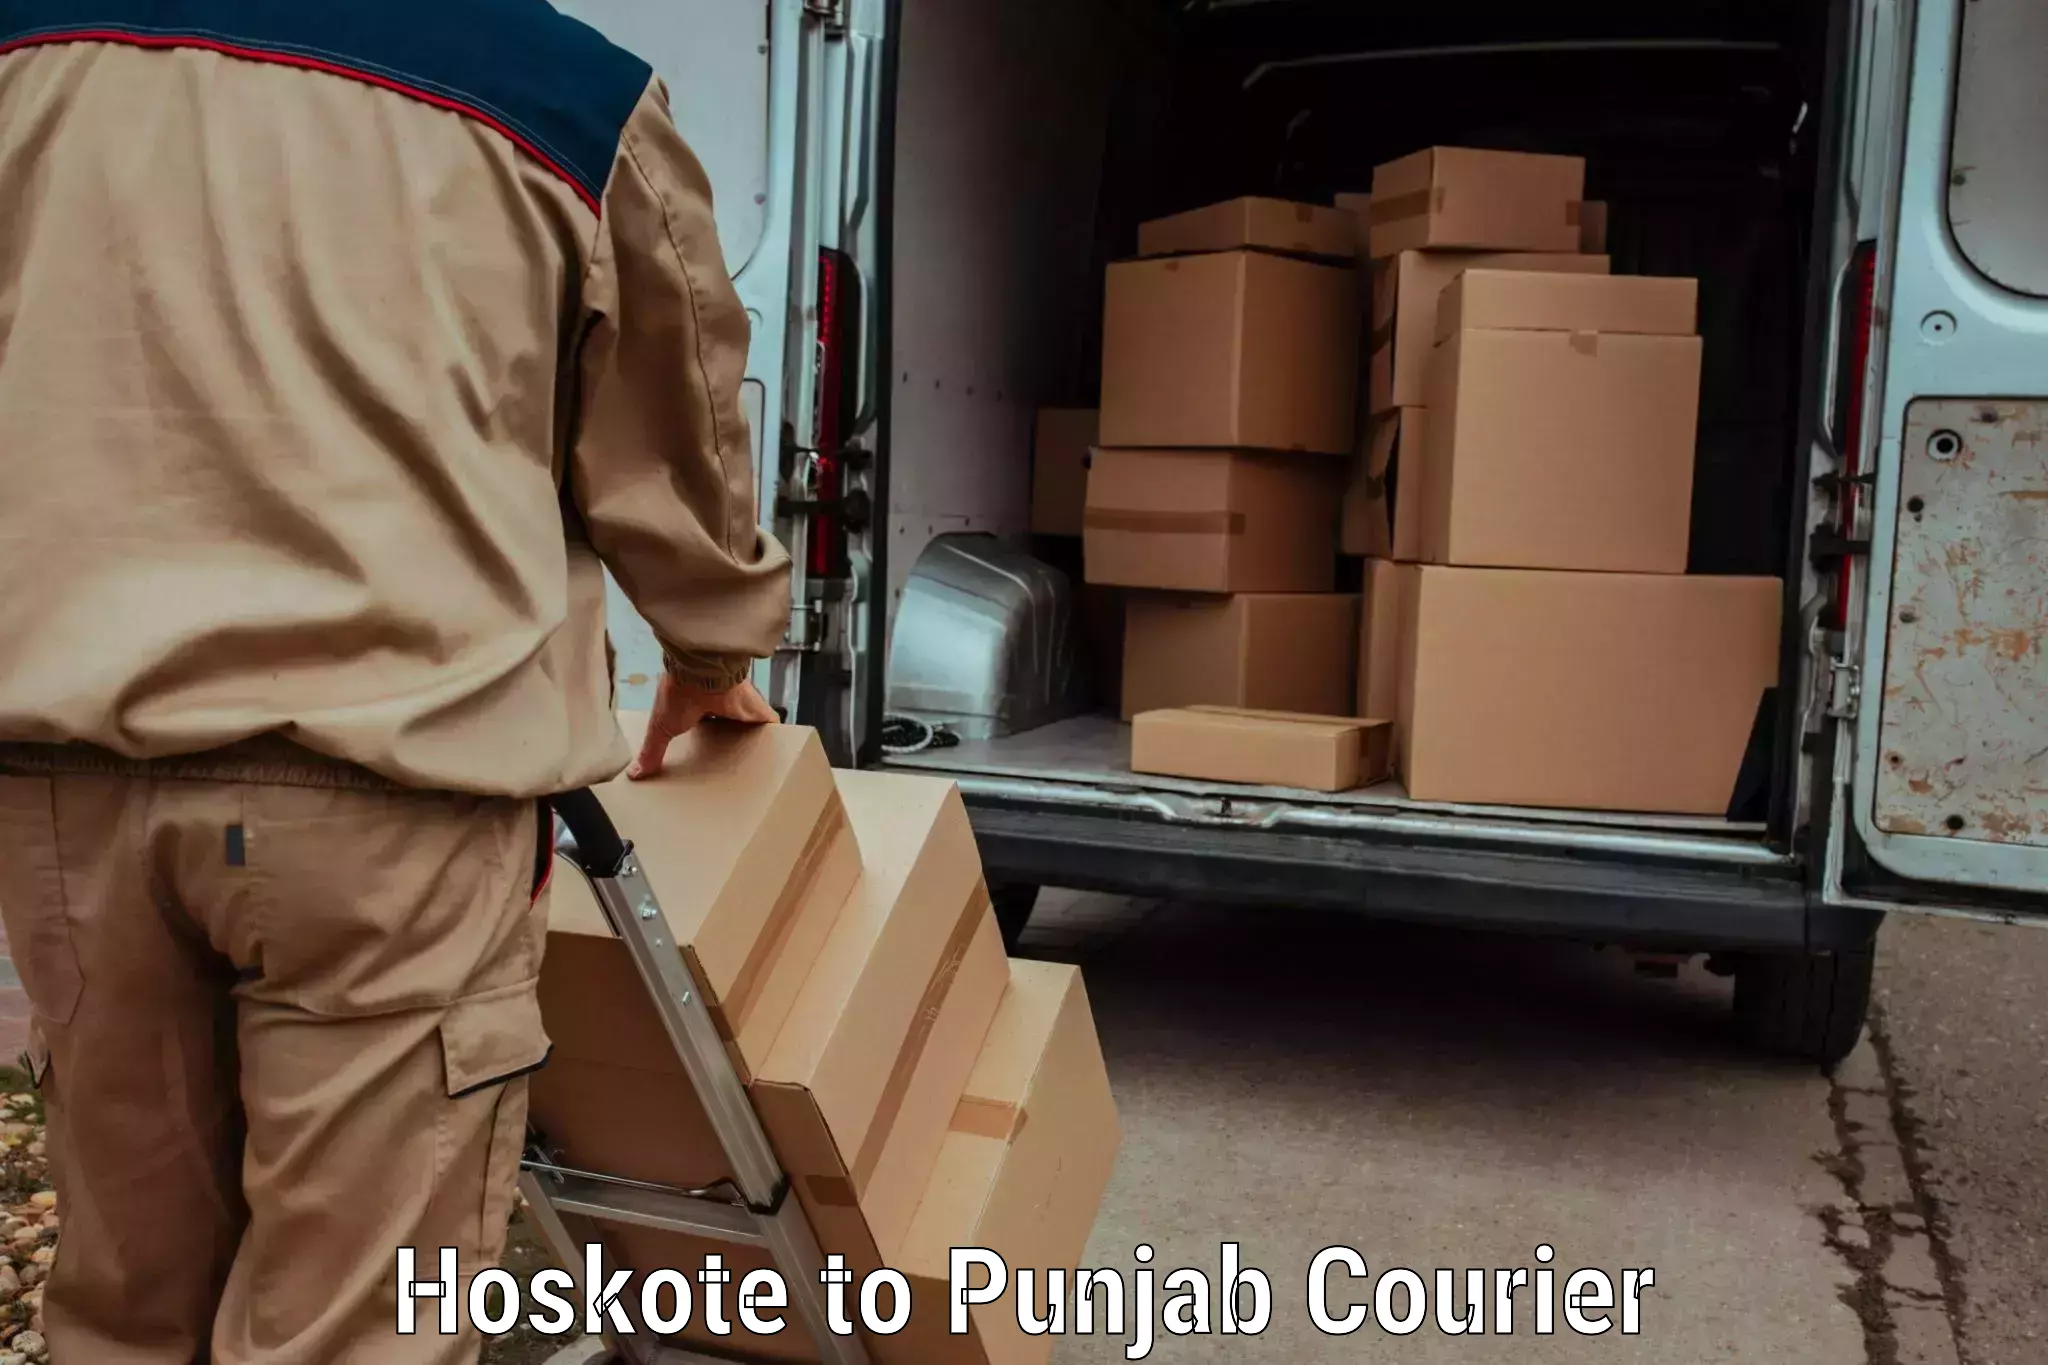 Luggage transport solutions in Hoskote to Punjab